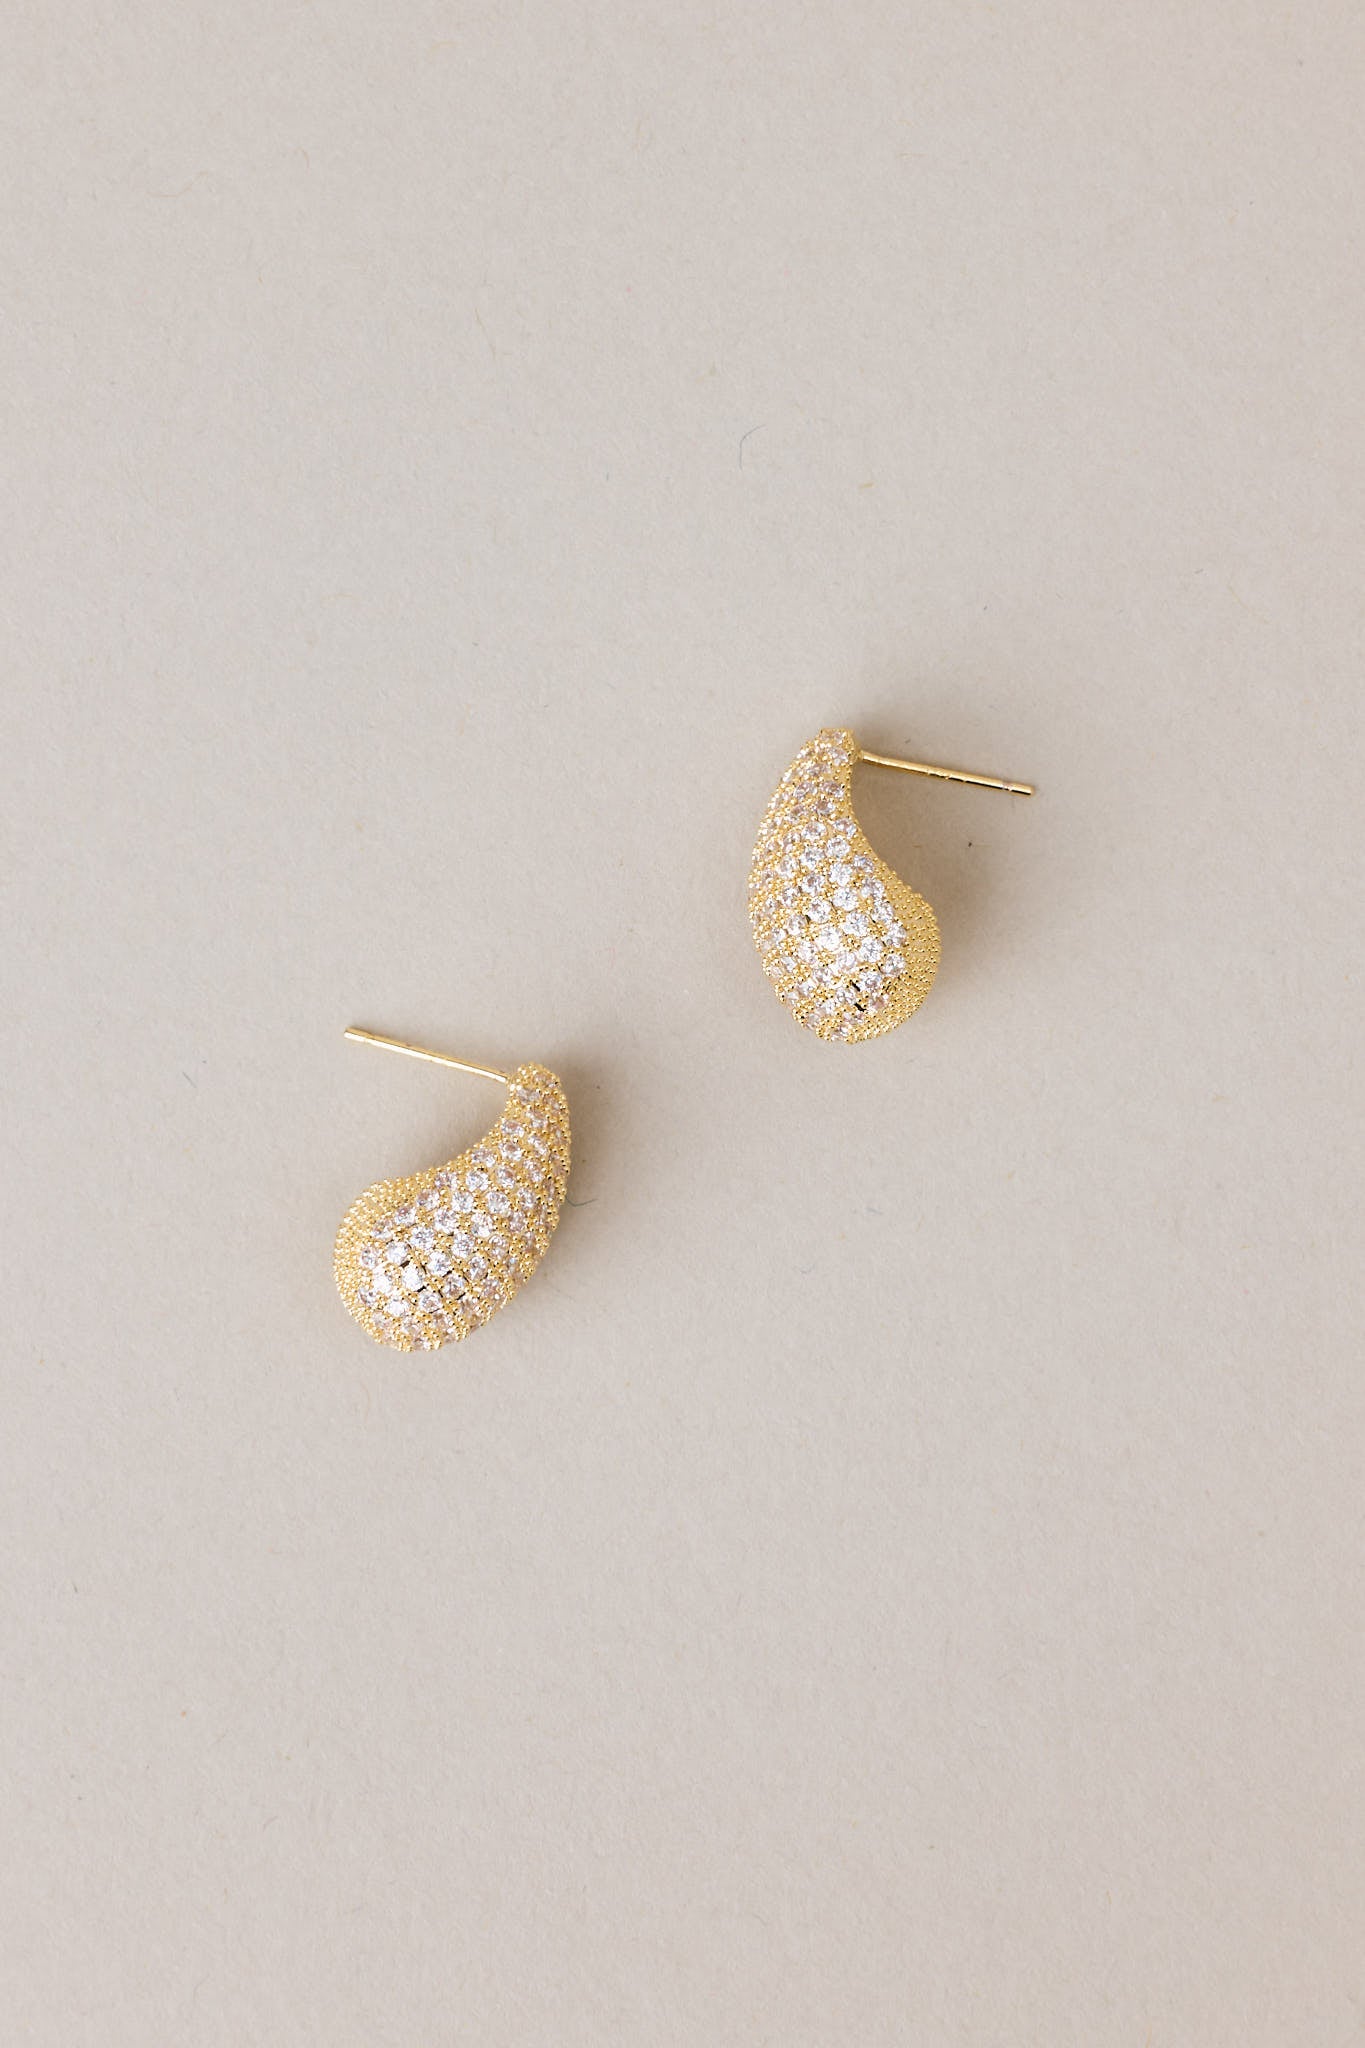 Tear shaped yellow gold earring with mini rhinestones covering it, and gold hardware. 